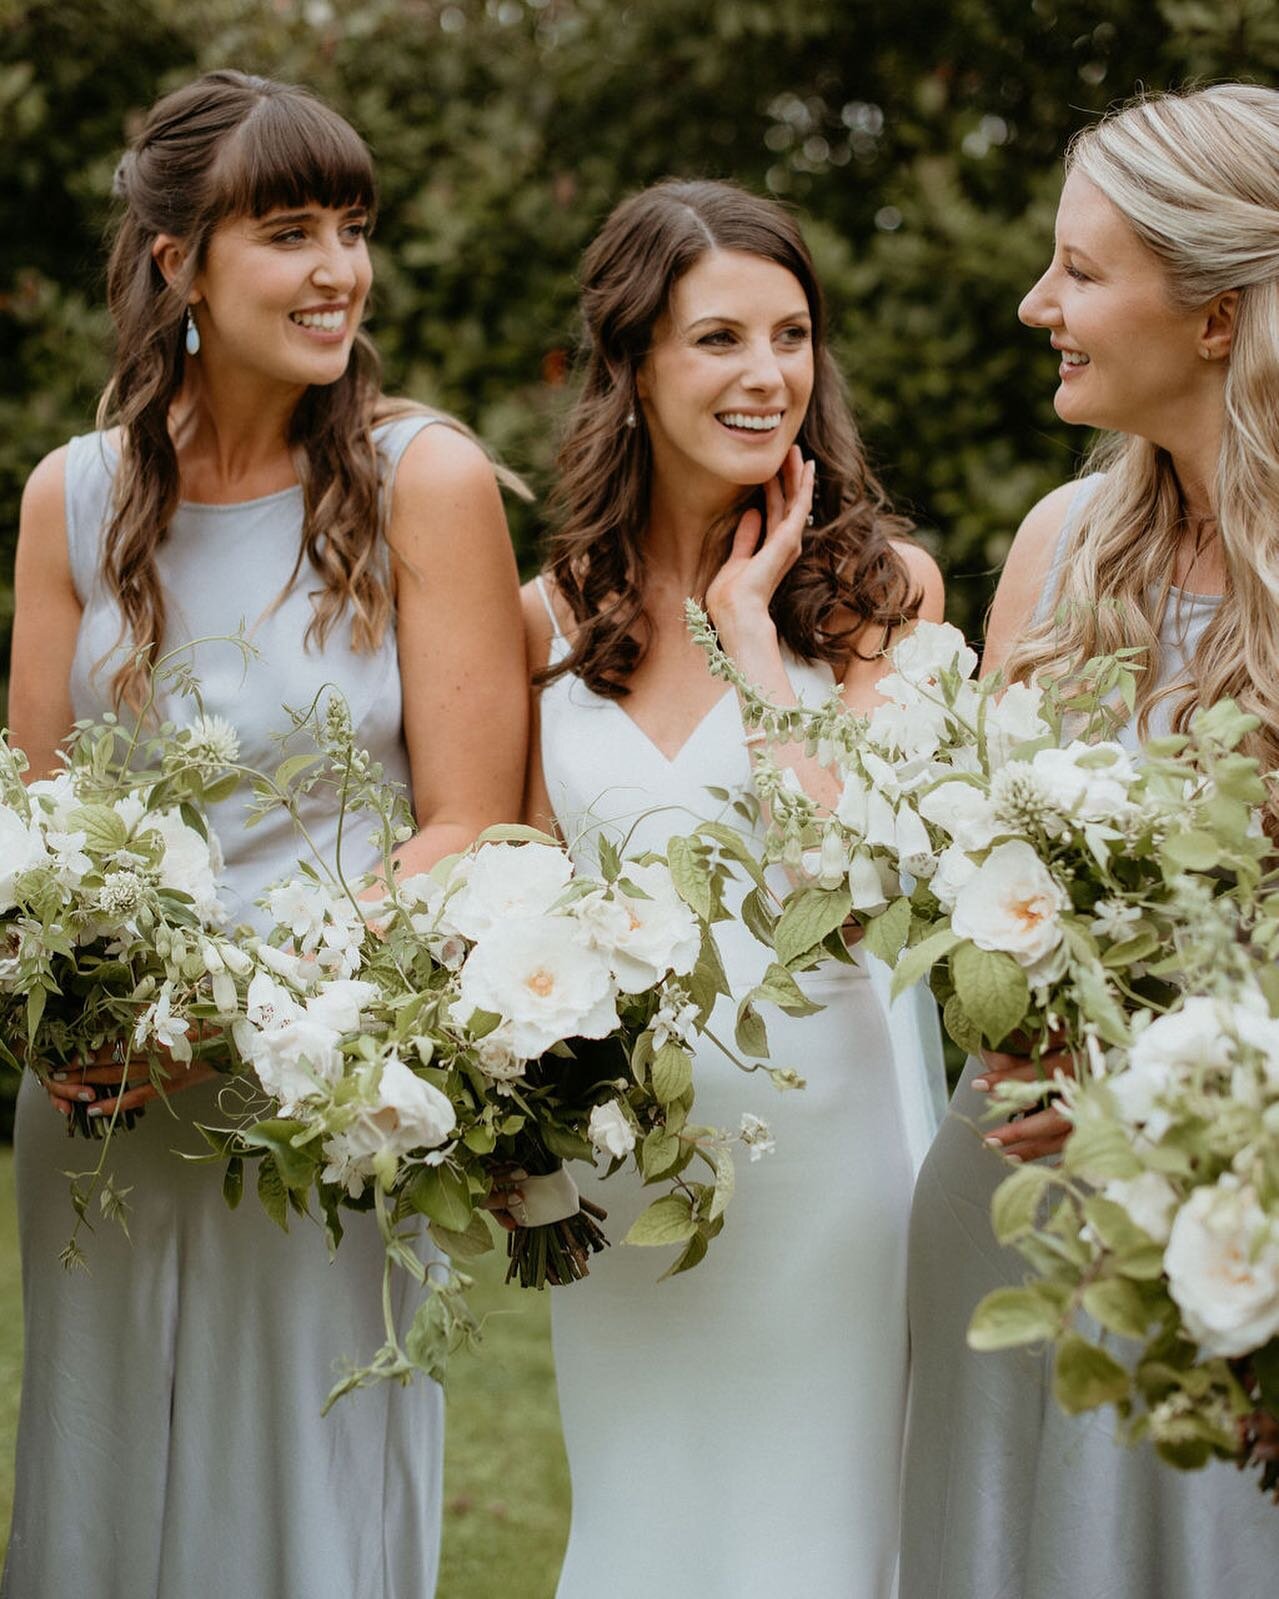 Stunning Becca and her girls with their late summer bouquets of roses, foxgloves, philadelphus and jasmine tendrils. Captured so perfectly by @clairefleck, with Becca wearing @suzanneneville 🤍